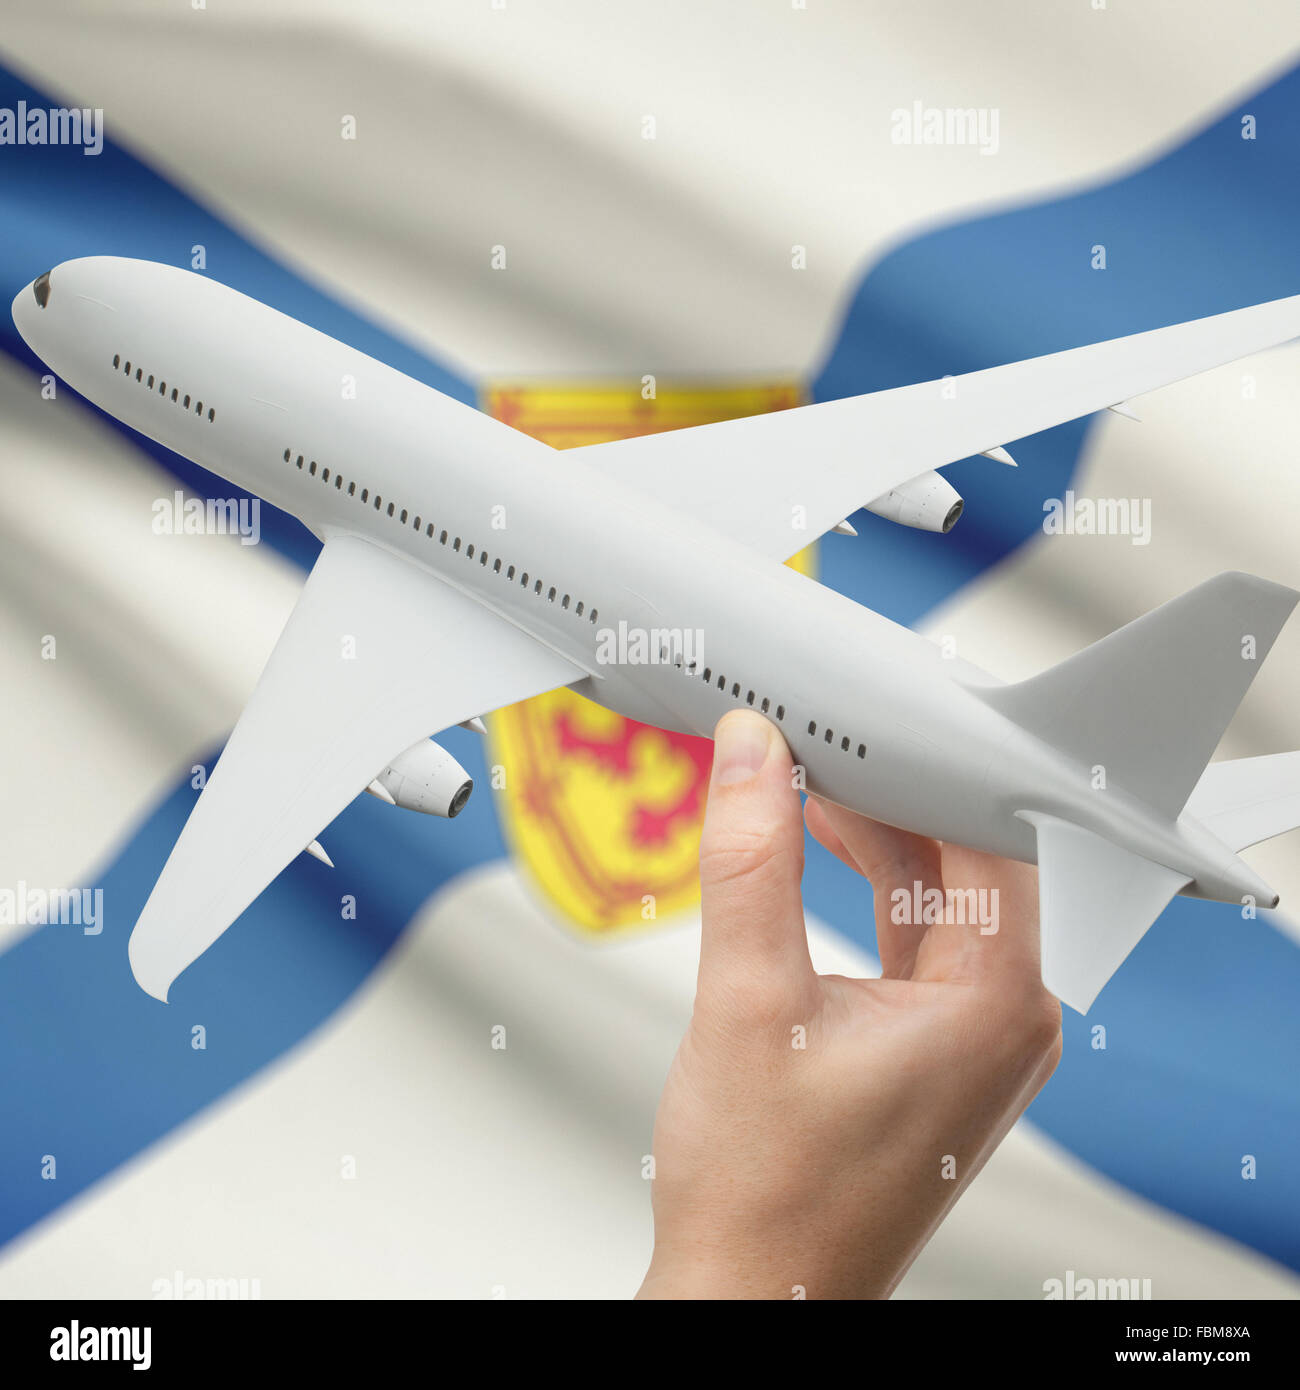 Airplane in hand with Canadian province or territory flag on background series - Nova Scotia Stock Photo